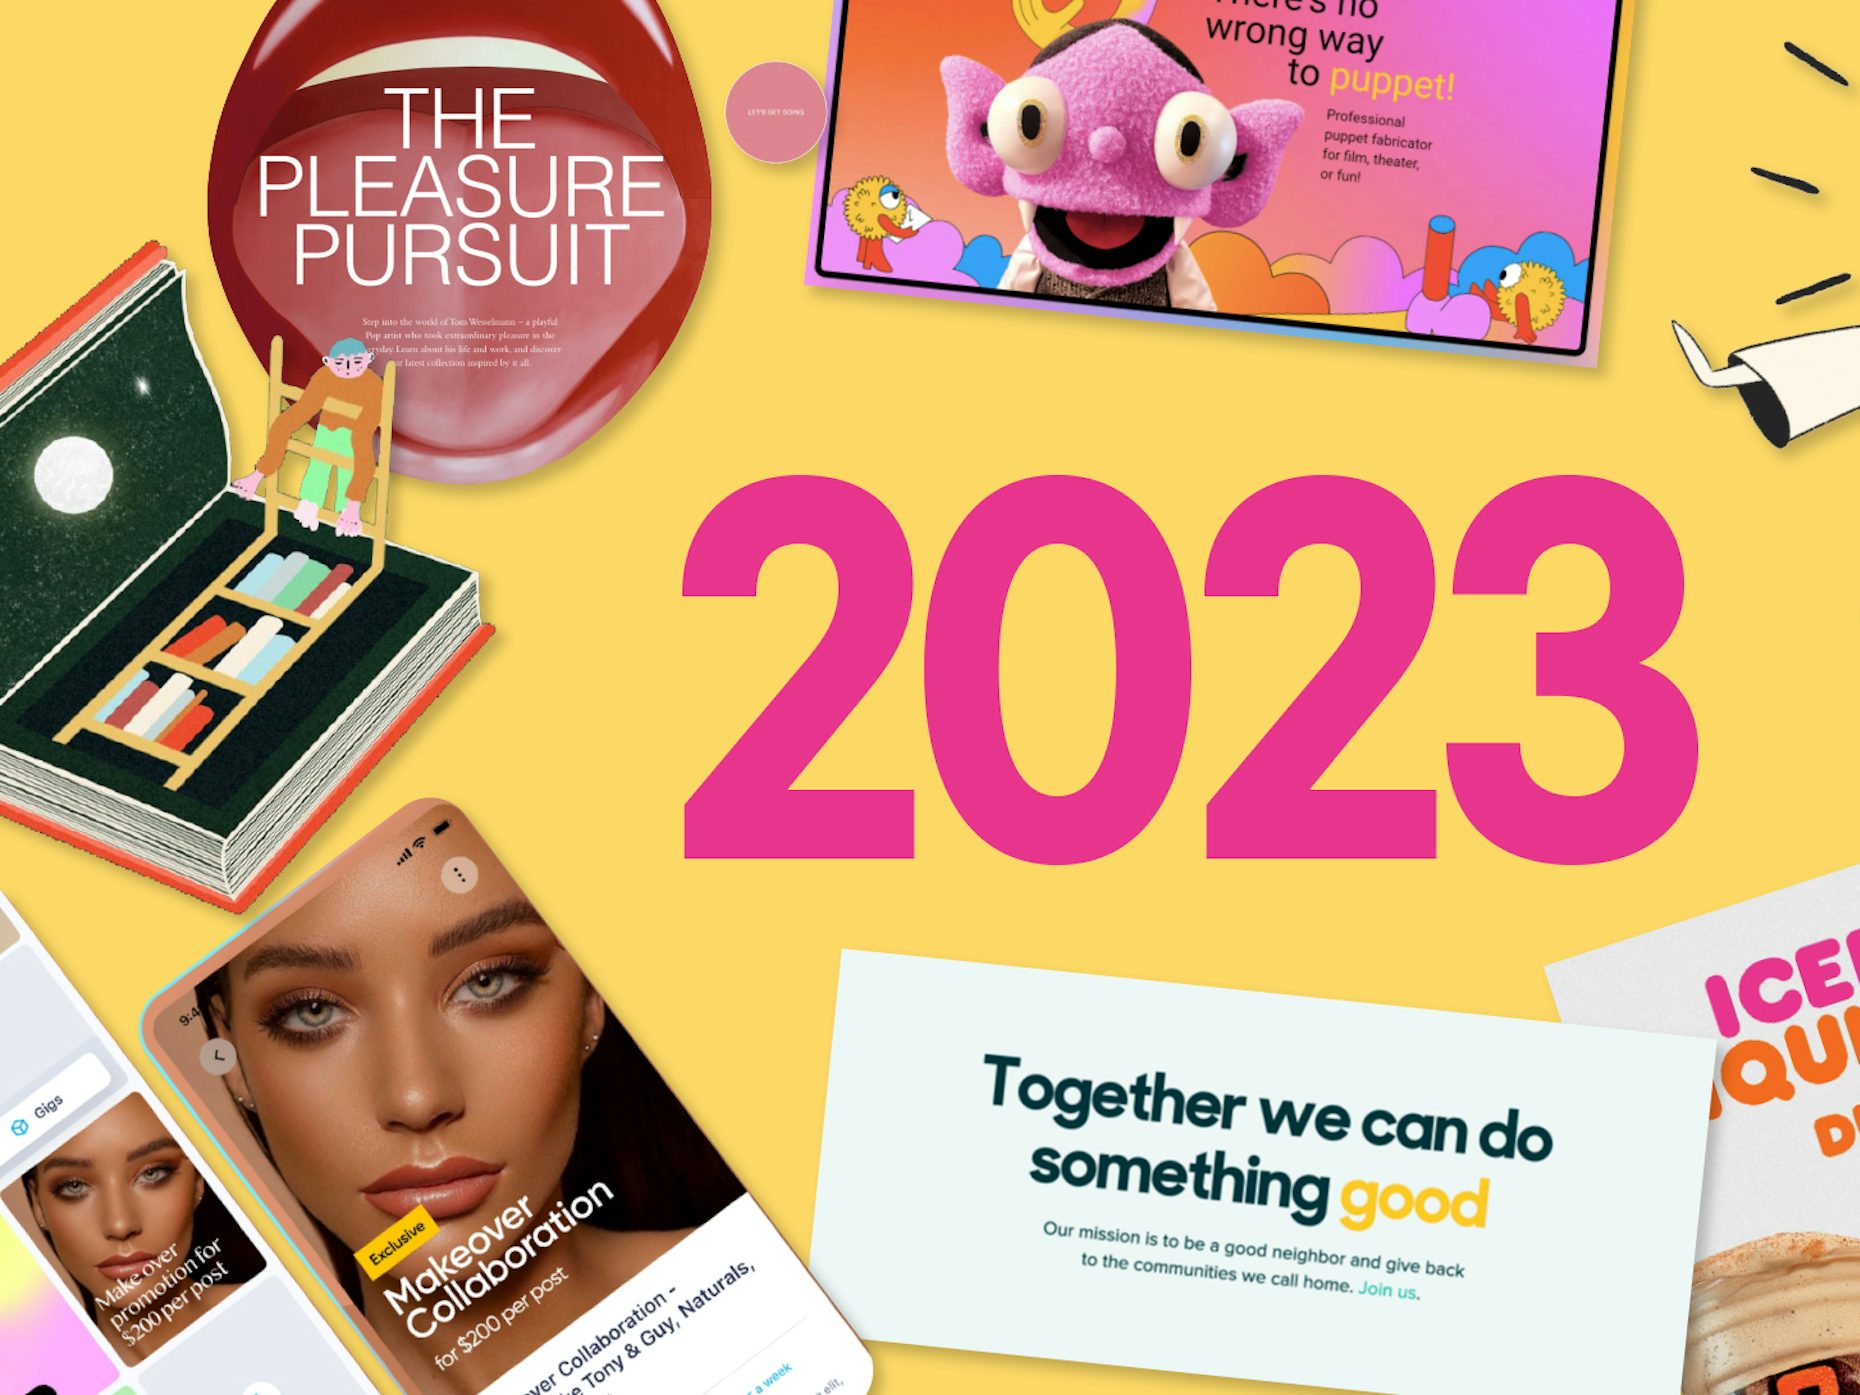 The 7 top digital marketing trends of 2023 - 99designs